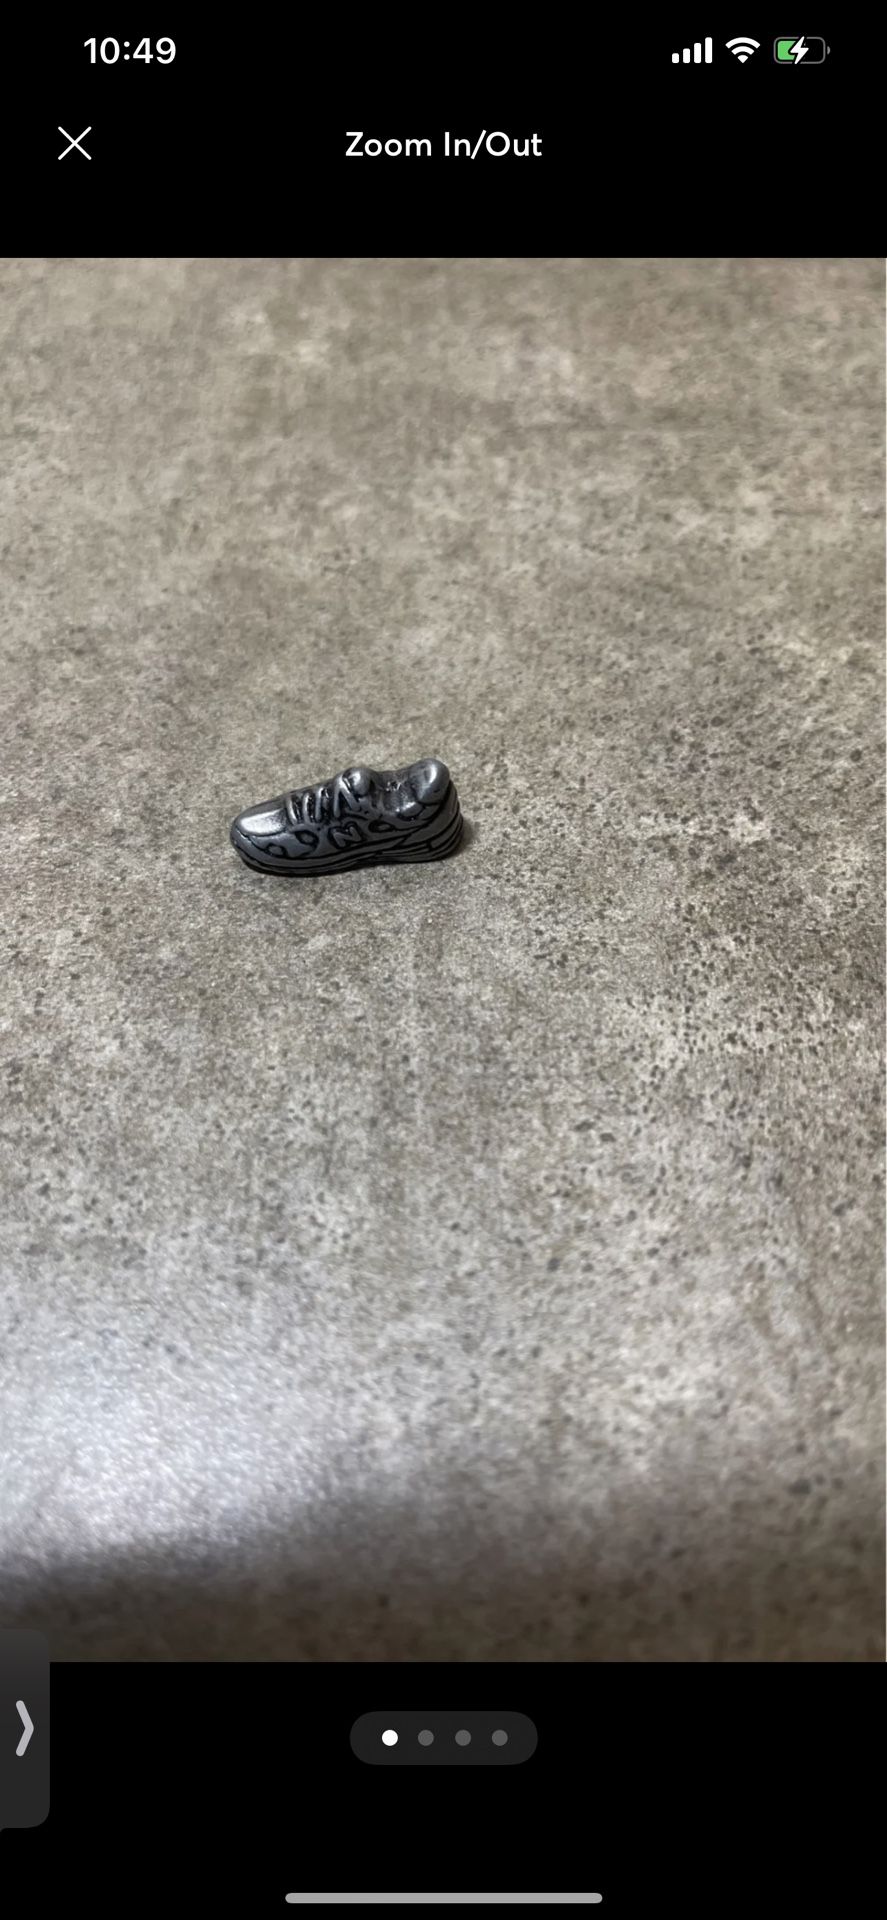 Here and Now New Balance Shoe Monopoly Piece